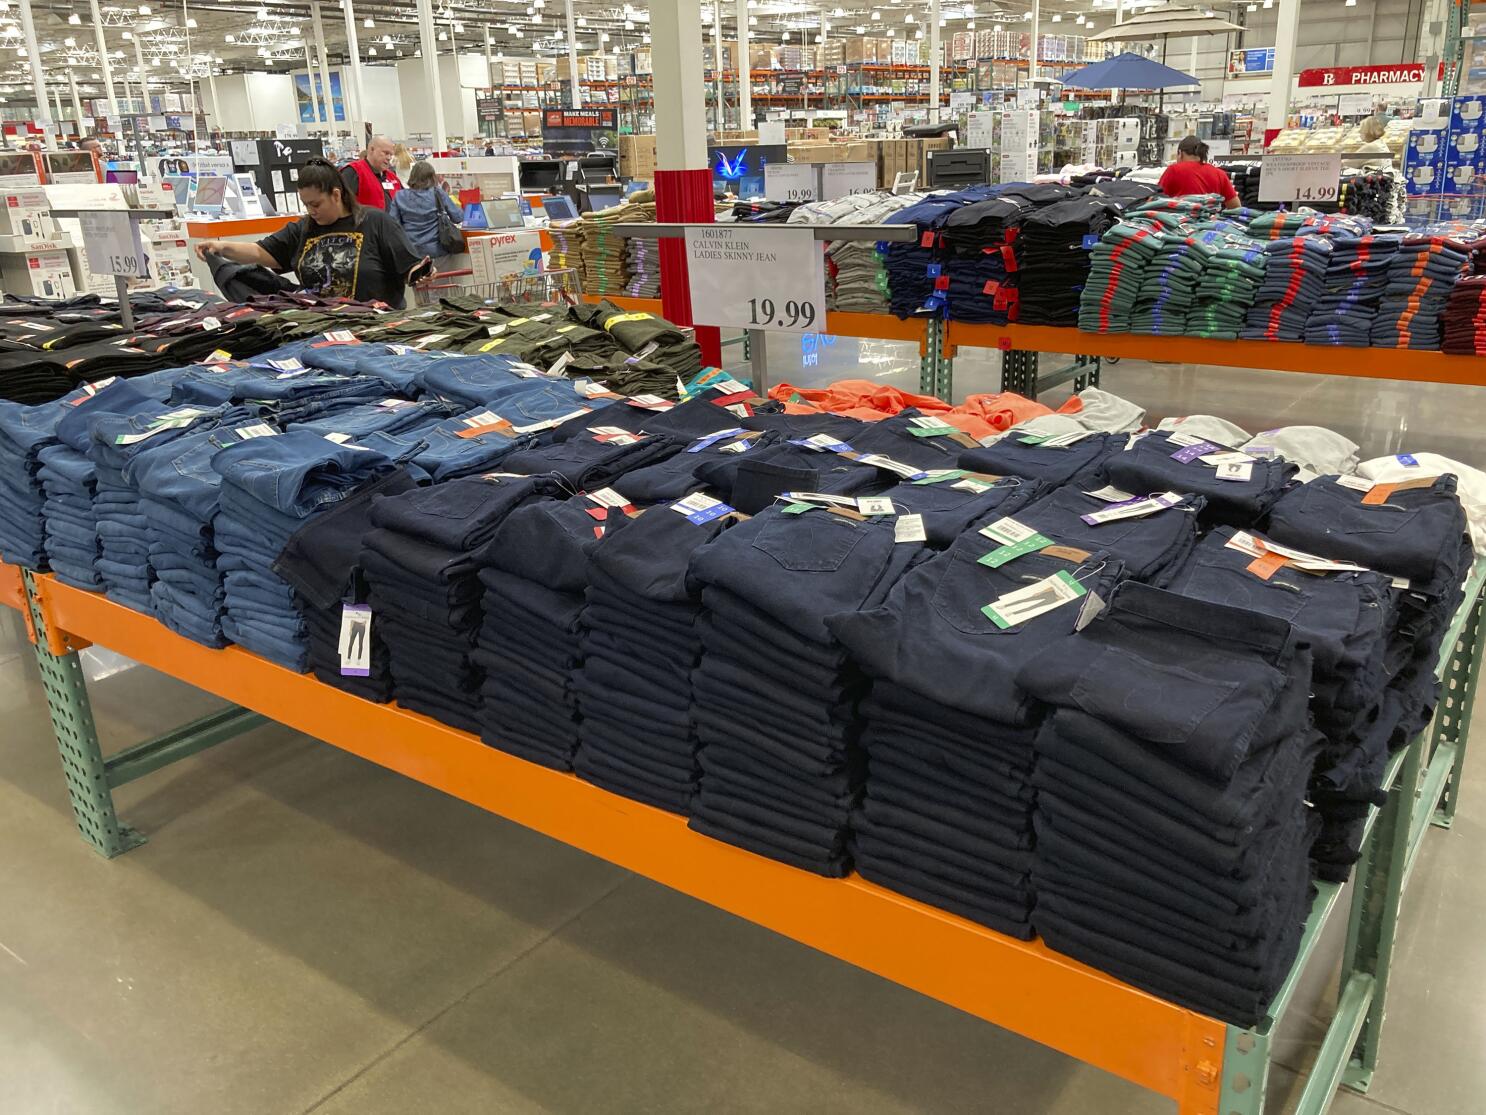 Costco Clothing Is Cheap. WSJ Readers Love It. But Is It Actually Good  Value? - WSJ